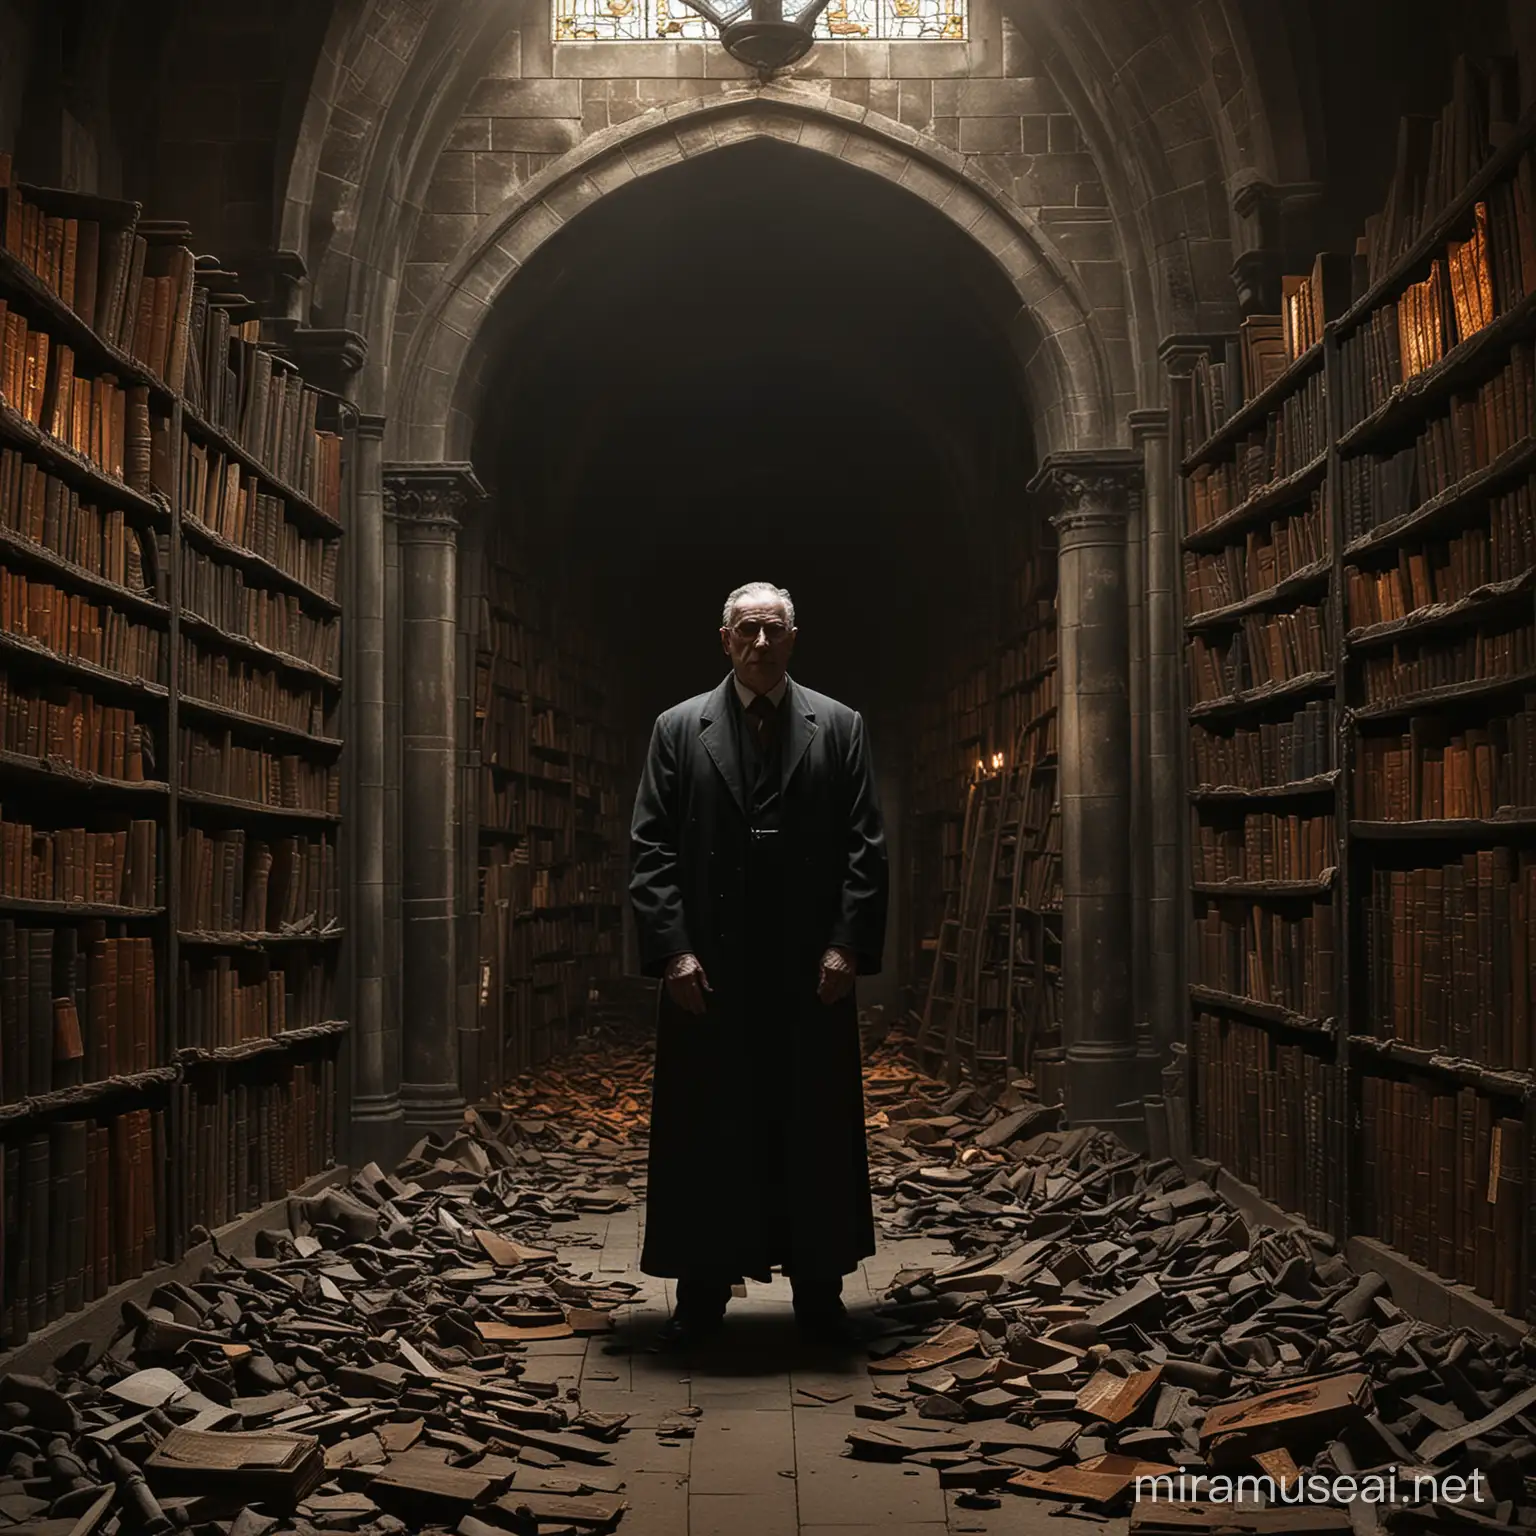 Mysterious Man in a Dark Church Library A Chilling Portrait